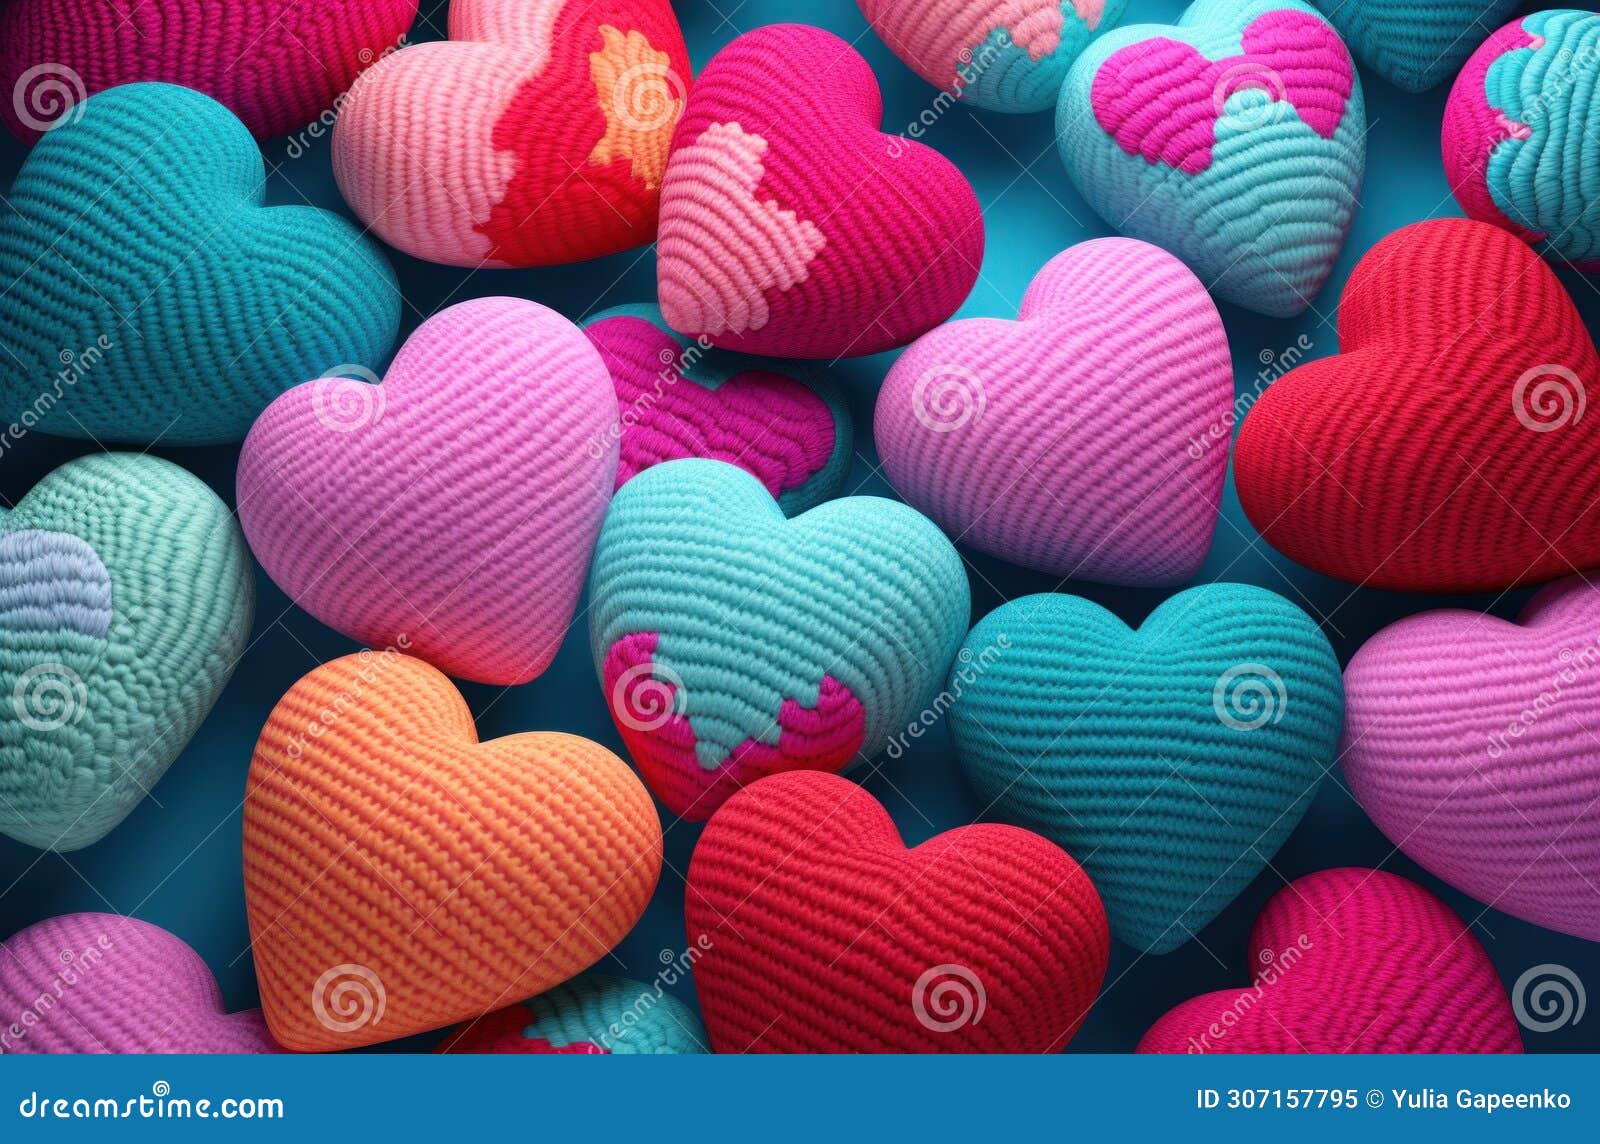 many colorful heart cartoons heart stock videos and royaltyfree footage